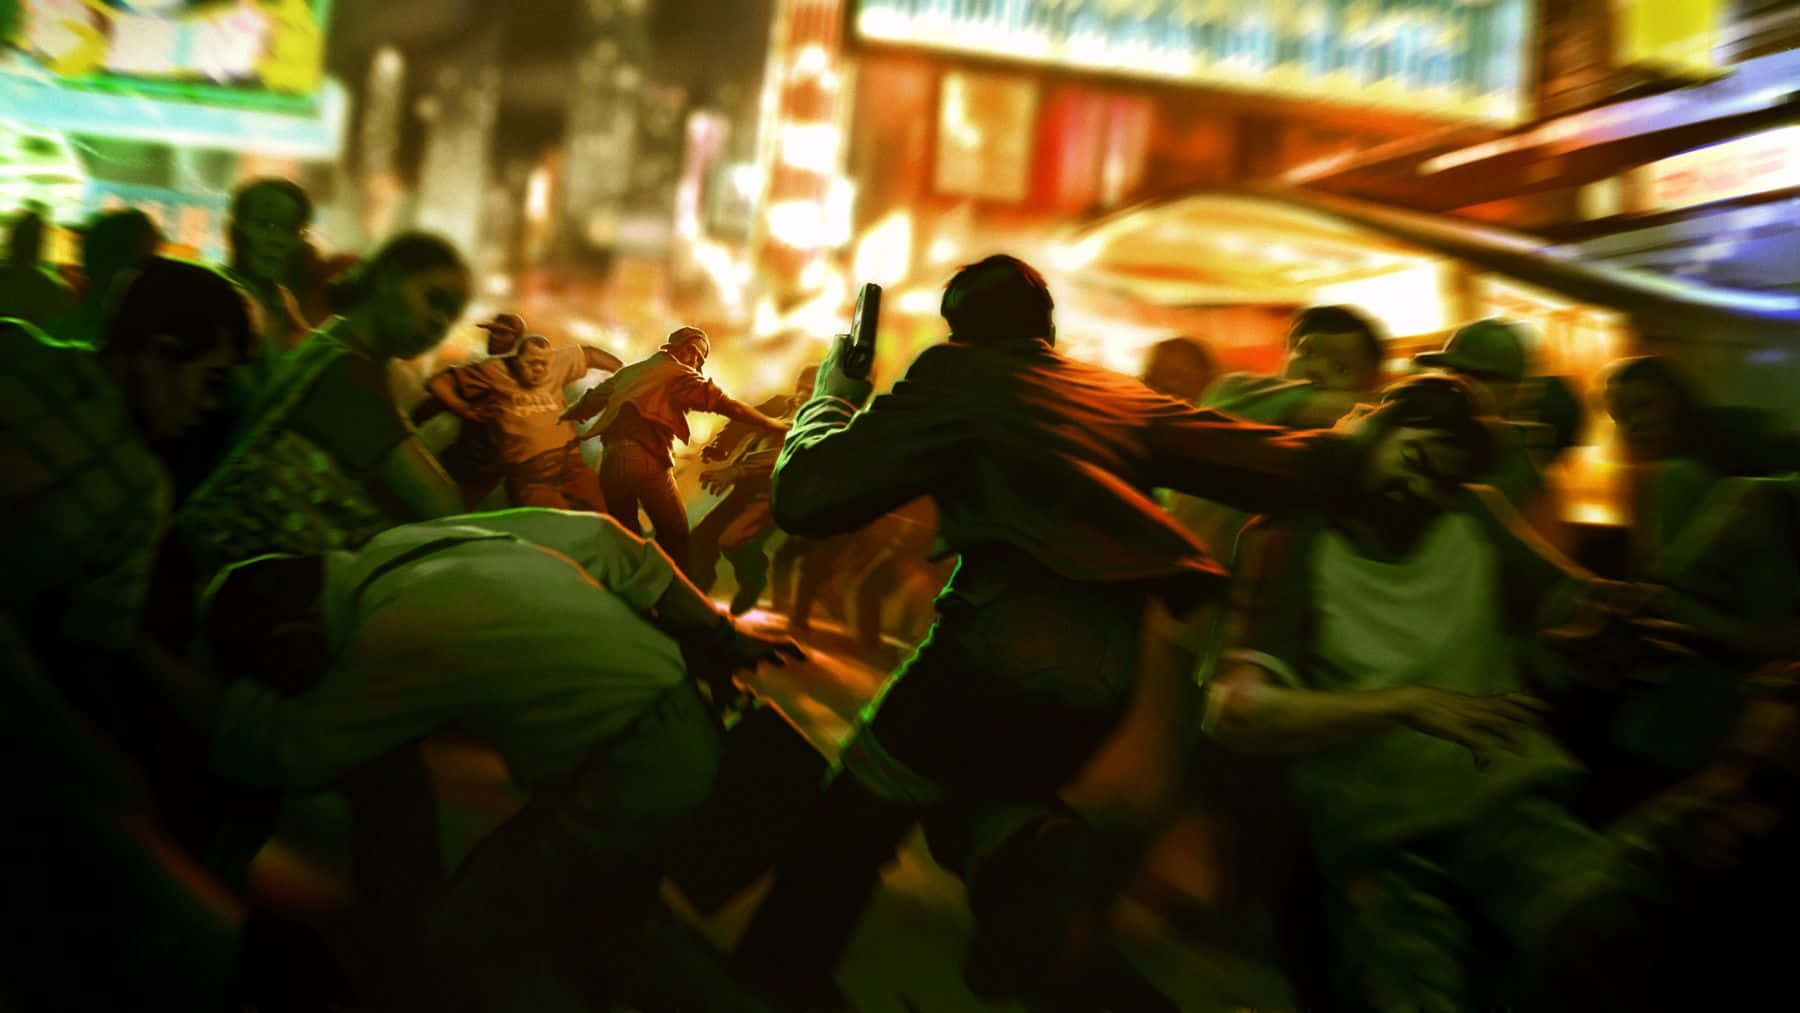 Experience an epic crime story in Sleeping Dogs